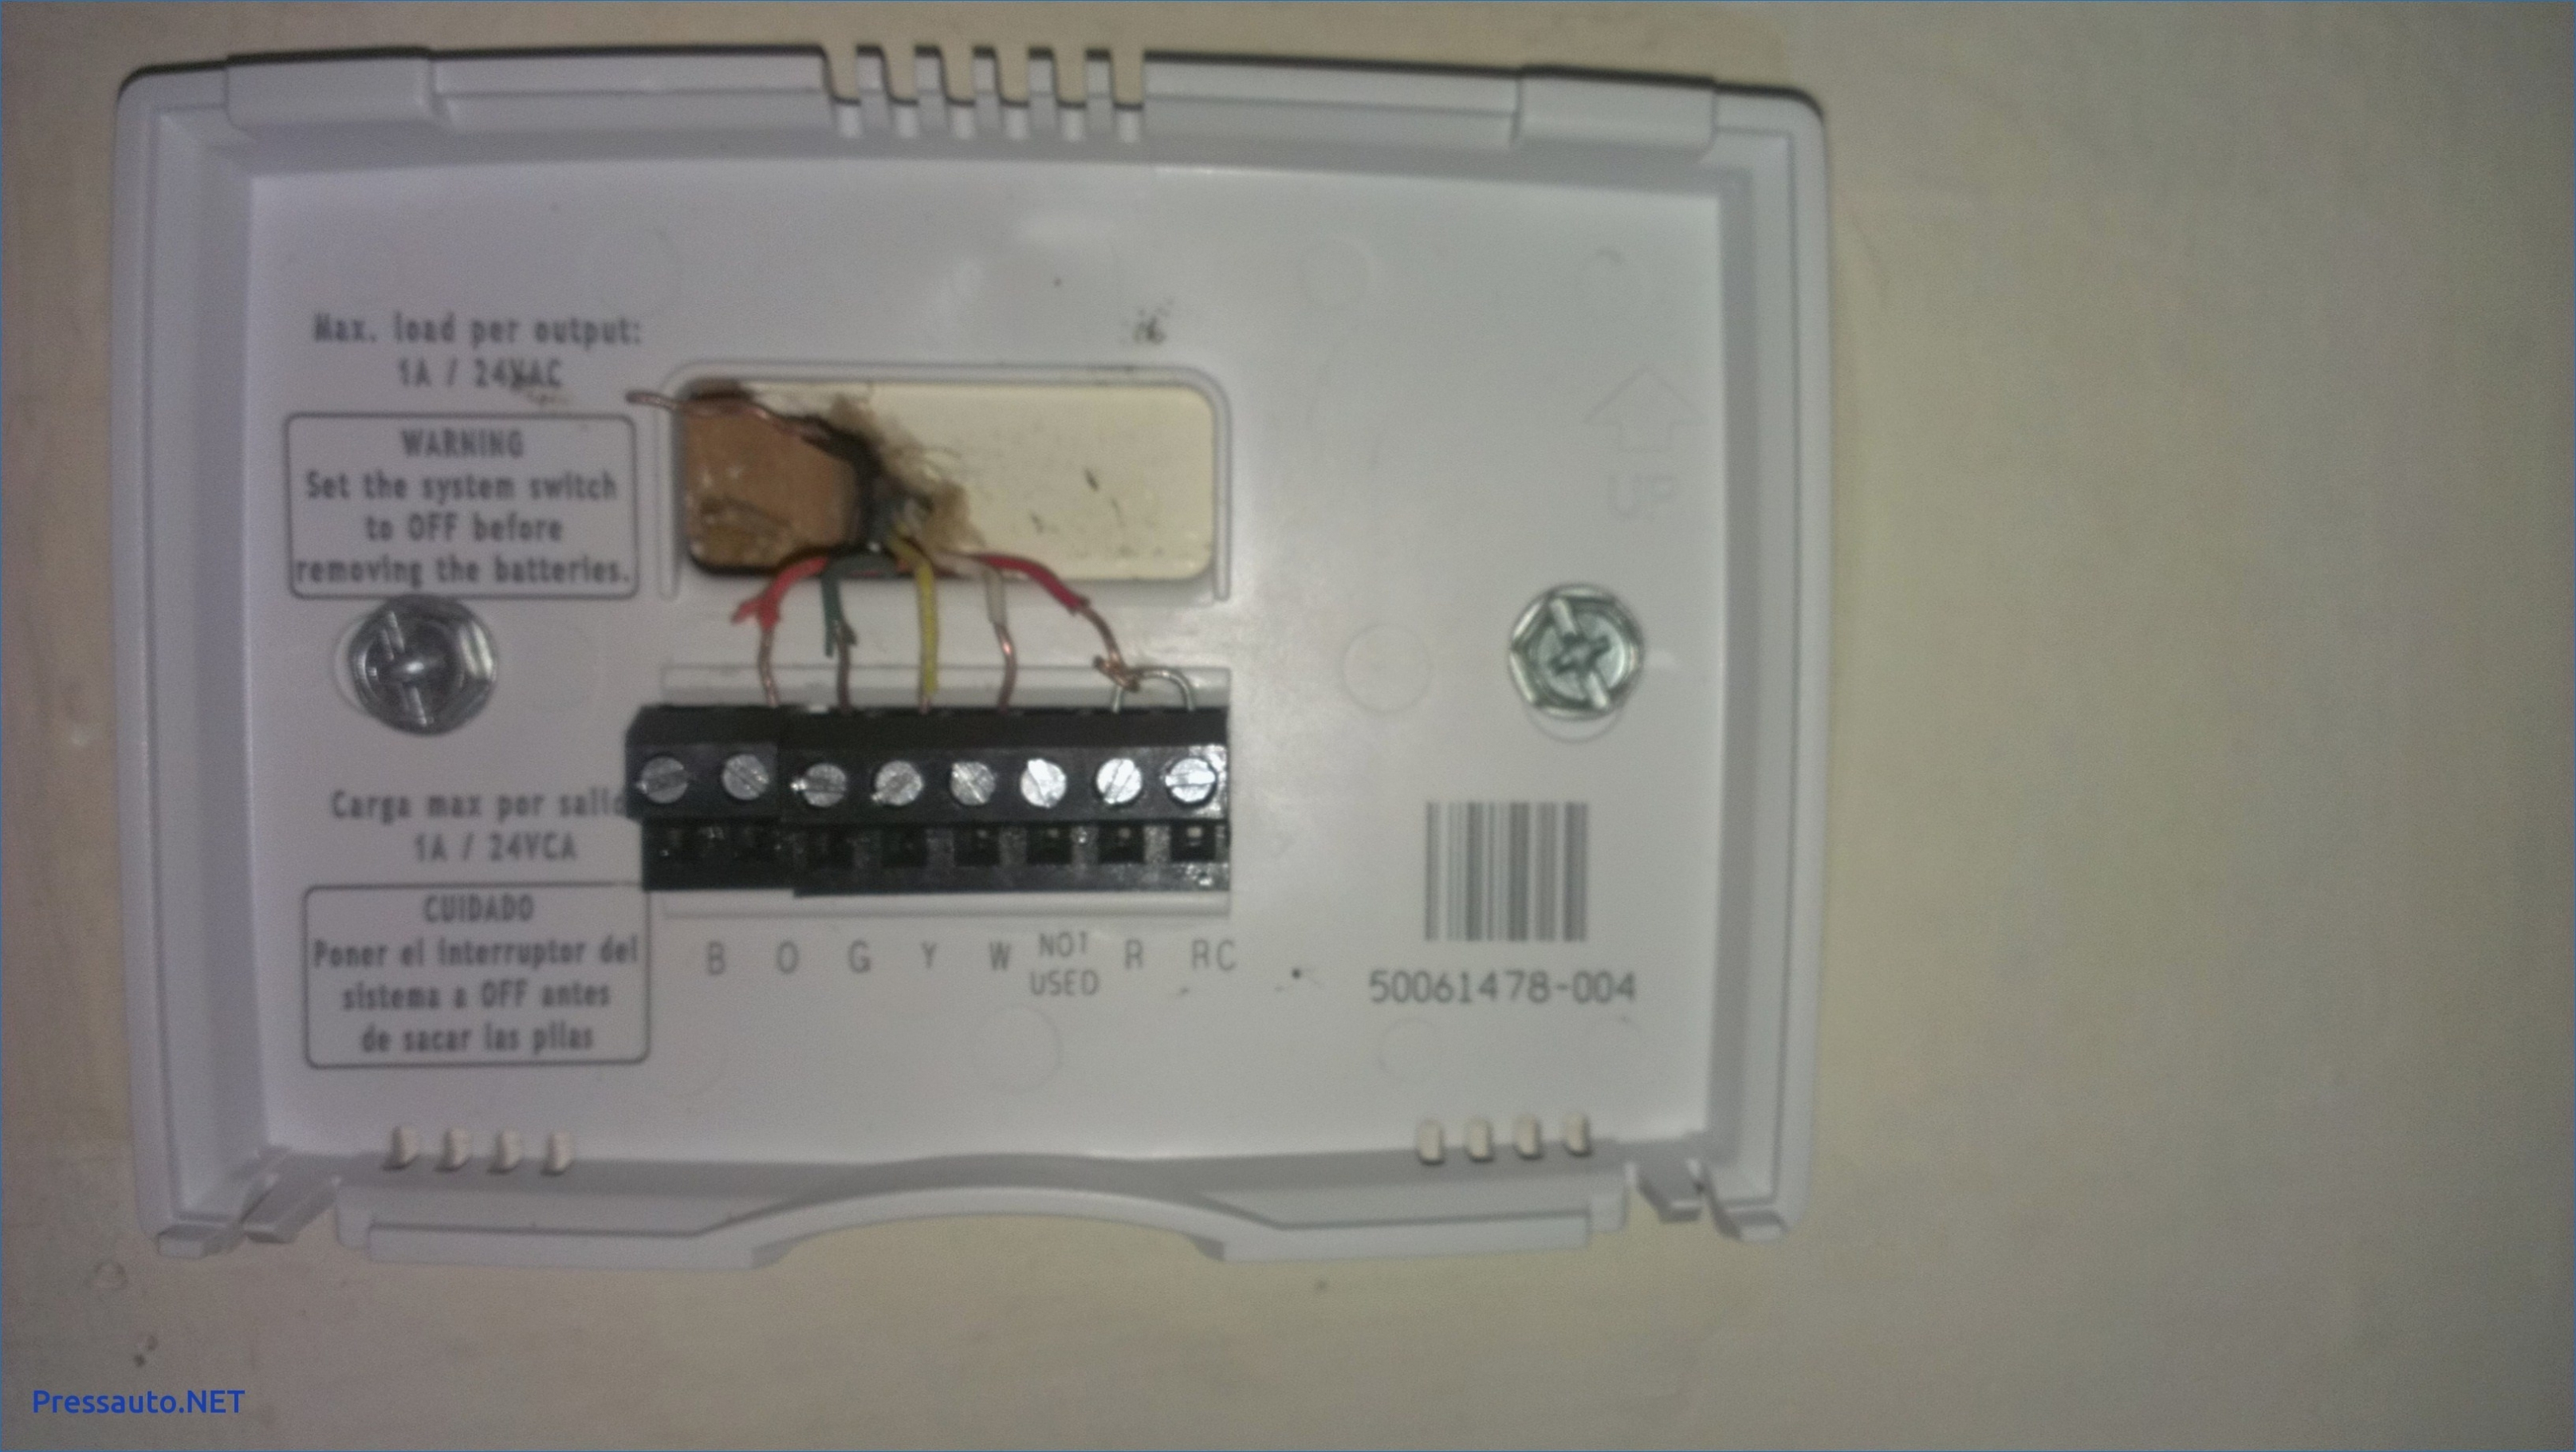 Luxpro Thermostat Wiring Diagram - Wiring Diagrams Img - Honeywell Wifi Thermostat Wiring Diagram